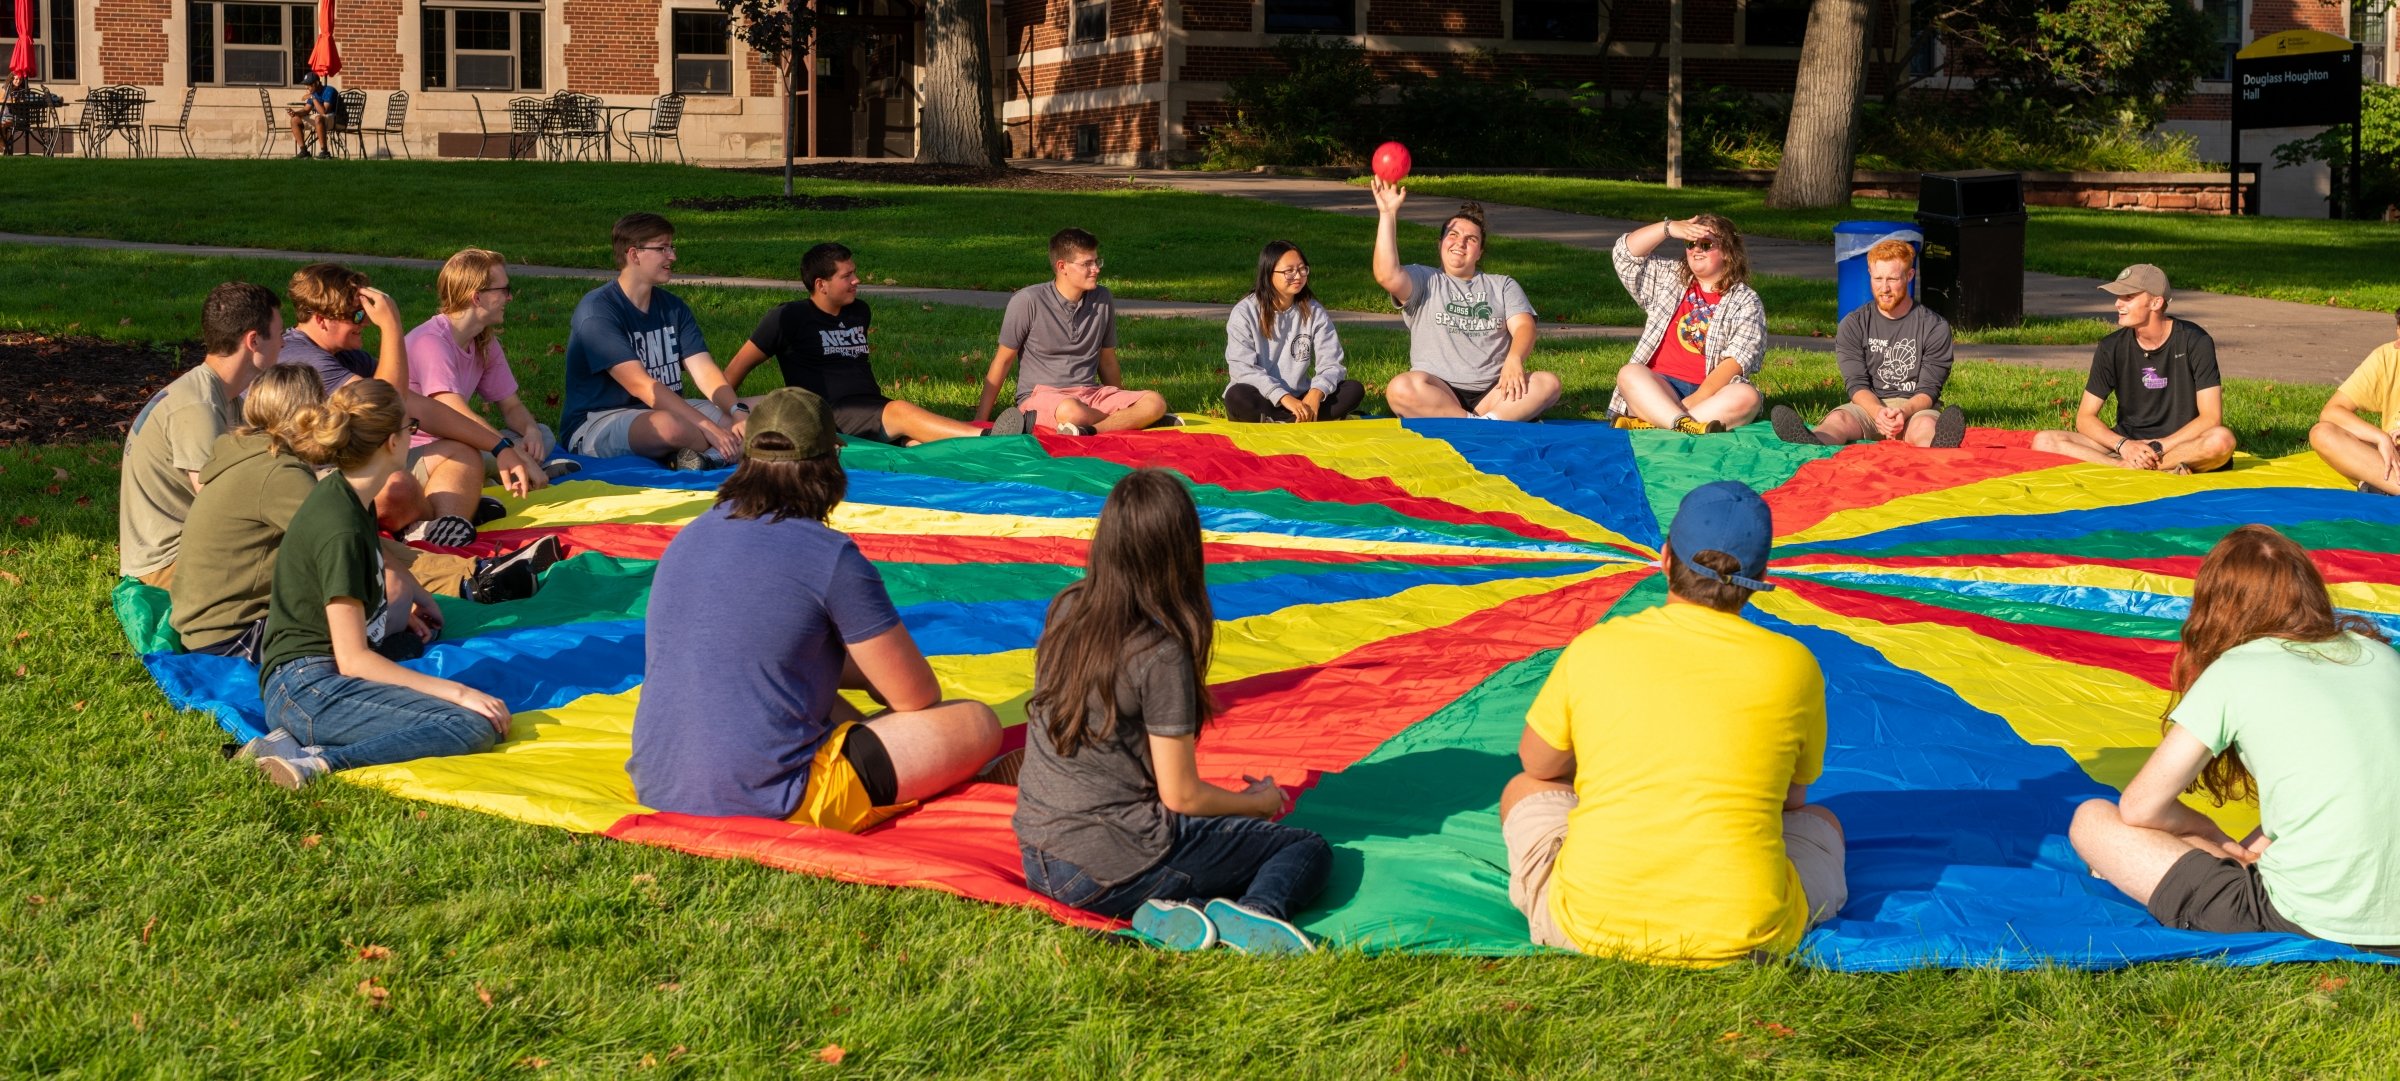 Students during orientation sitting in a circle on a colorful circular blanket.